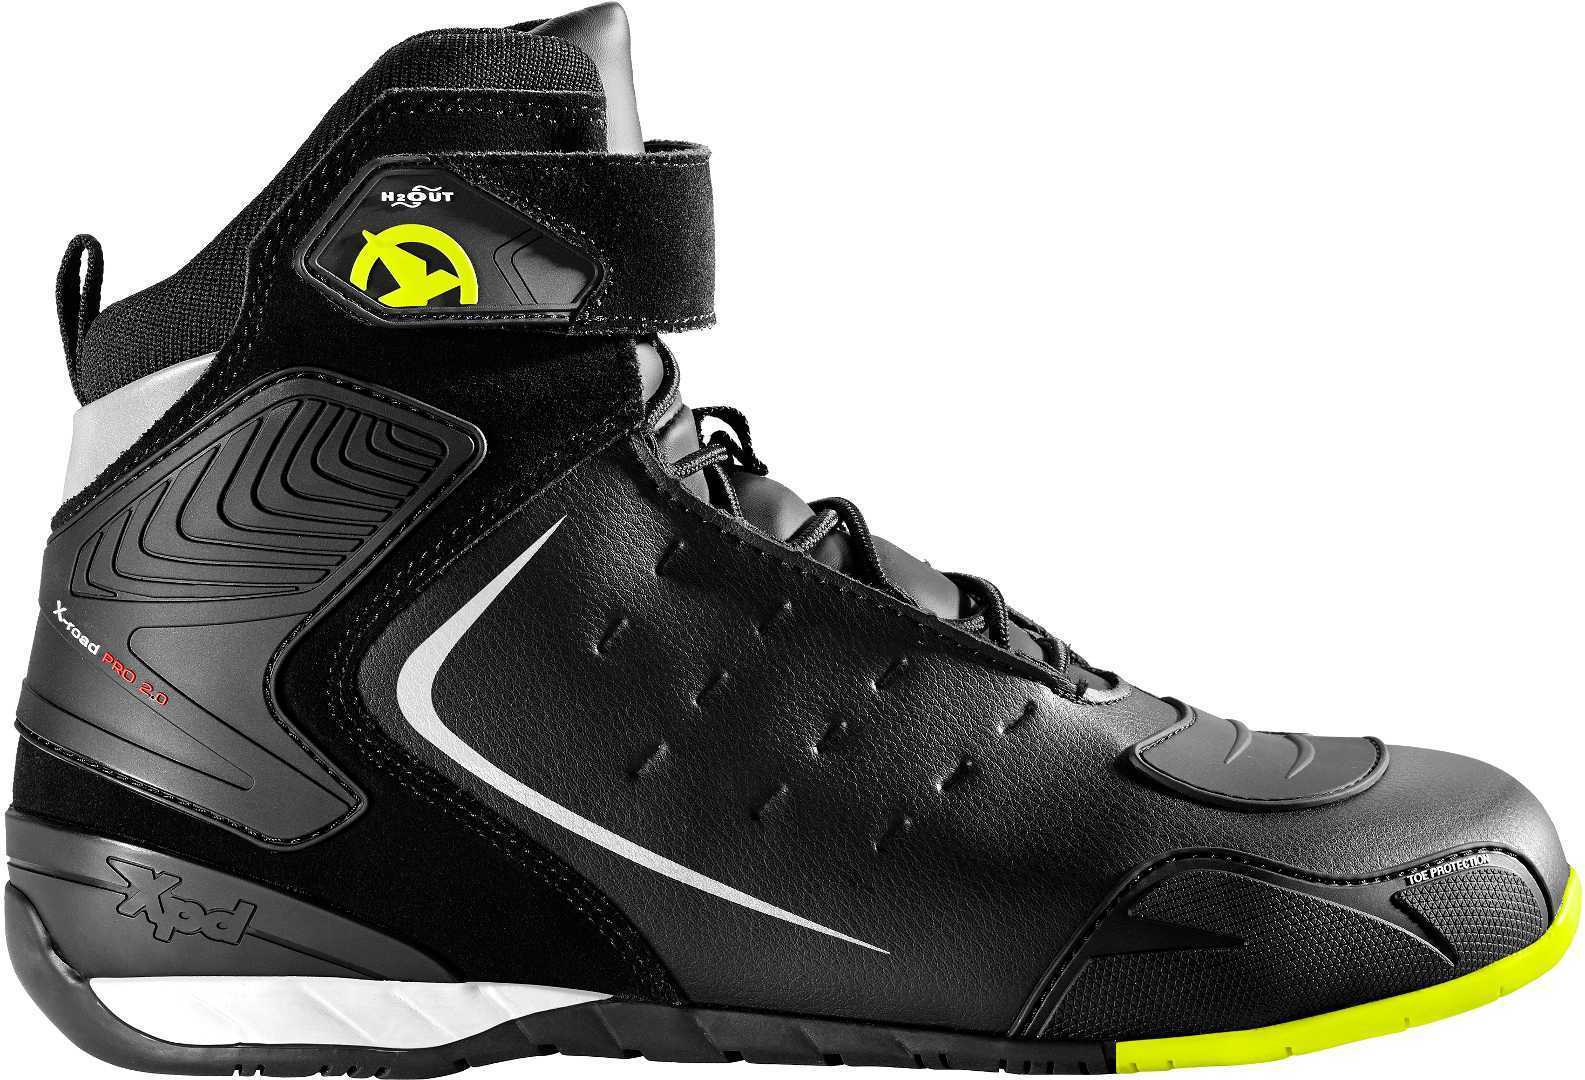 Image of XPD X-Road H2Out Yellow Fluo Size 42 EN